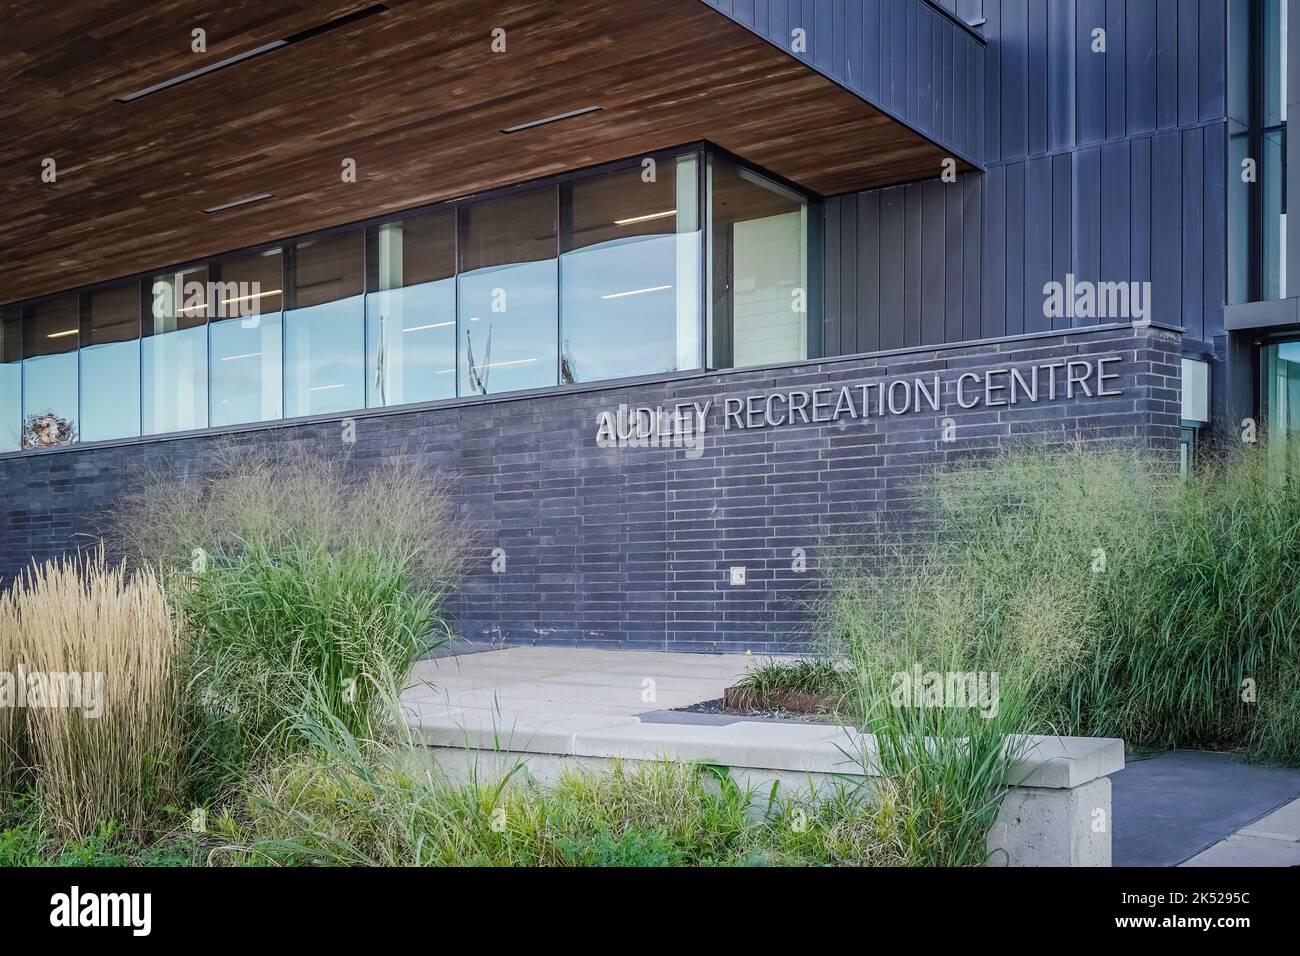 Audley Recreation Centre, is a moden community center located in Ajax, Ontario, Canada Stock Photo